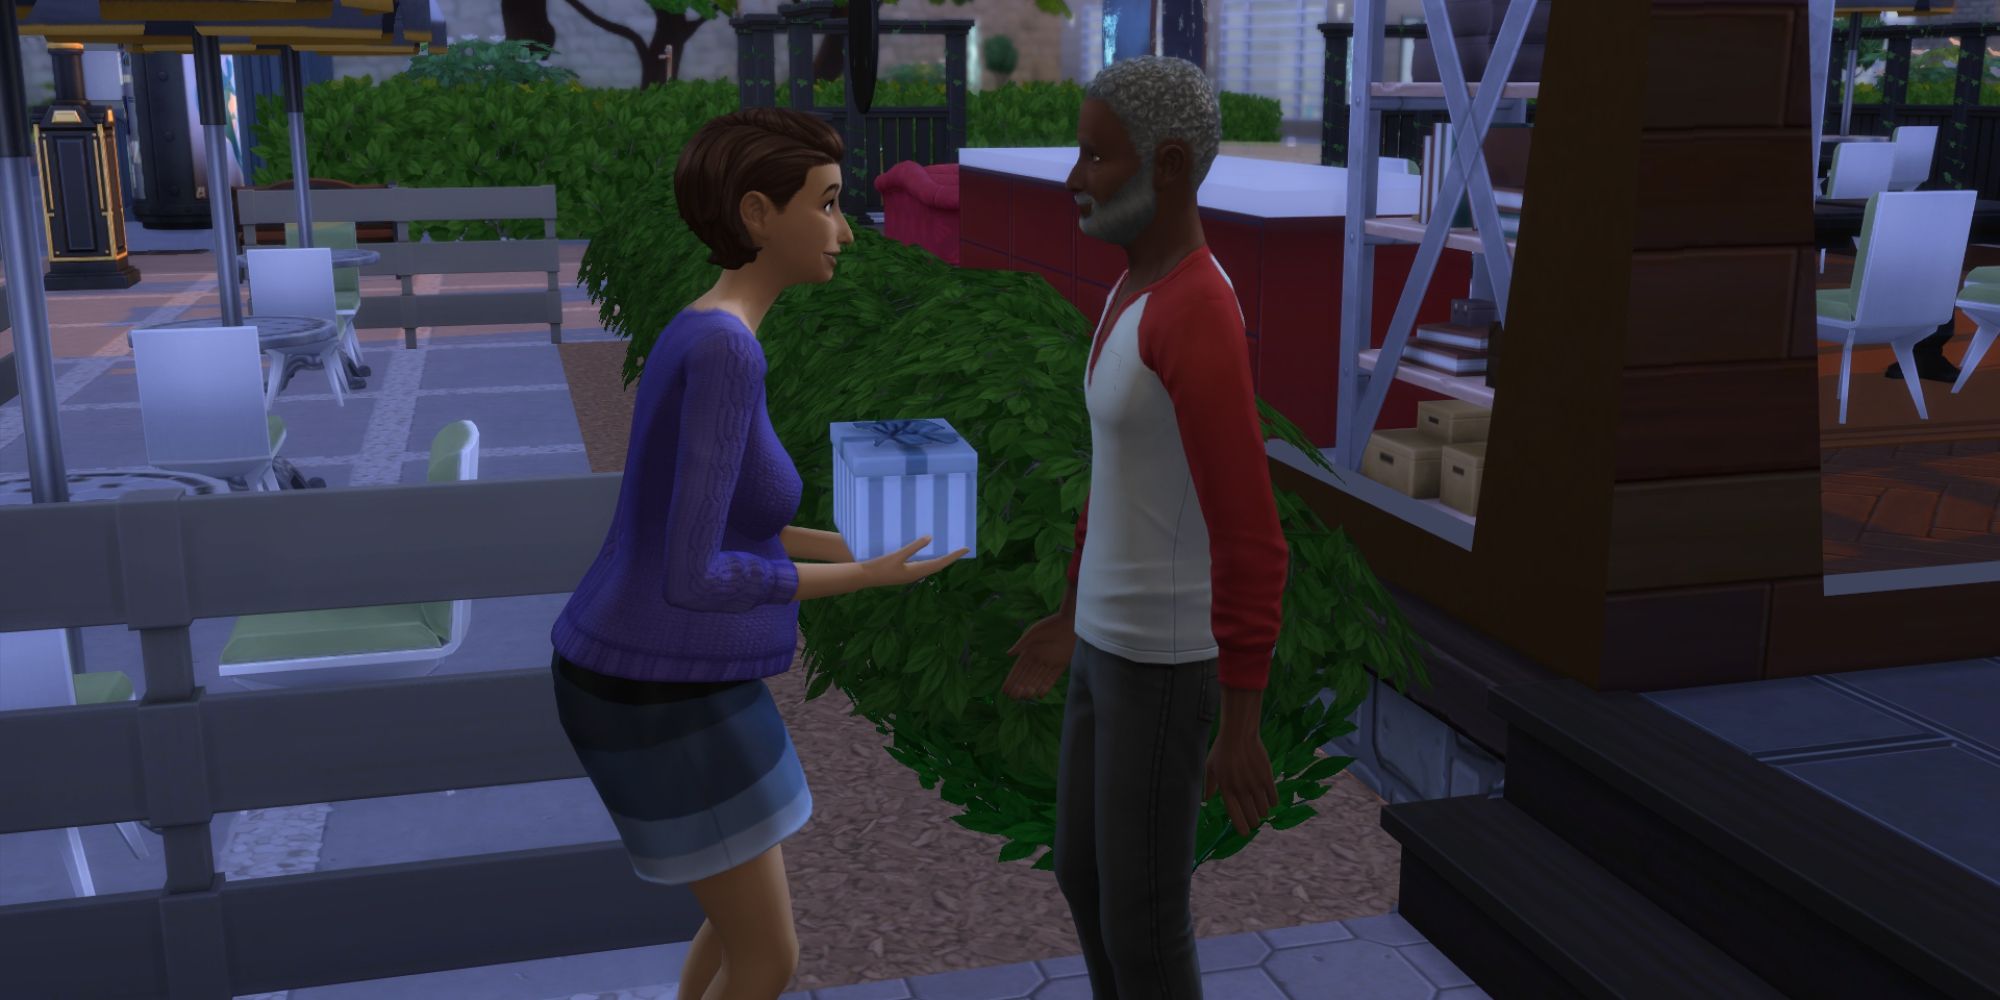 An elderly Sim presents a young pregnant Sim with a gift for her baby shower in the Sims 4.